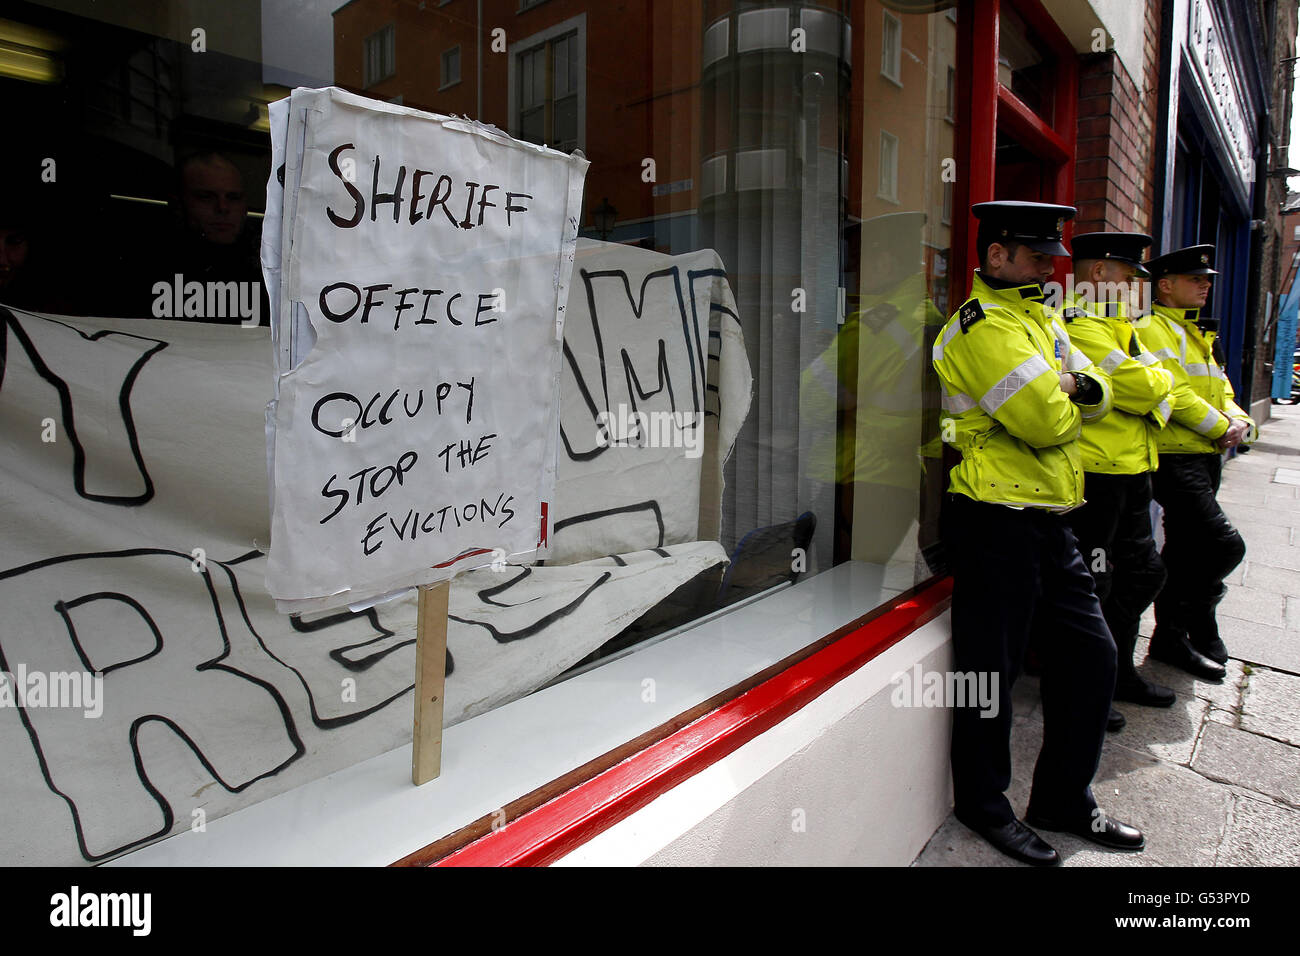 Members of Occupy Dame St occupy the offices of the Dublin Sherrif's offic on Fownes St,Temple Bar Dublin to protest against the eviction yesterday of Brendan and Asta Kelly from their home in Killiney, Co Dublin. Stock Photo